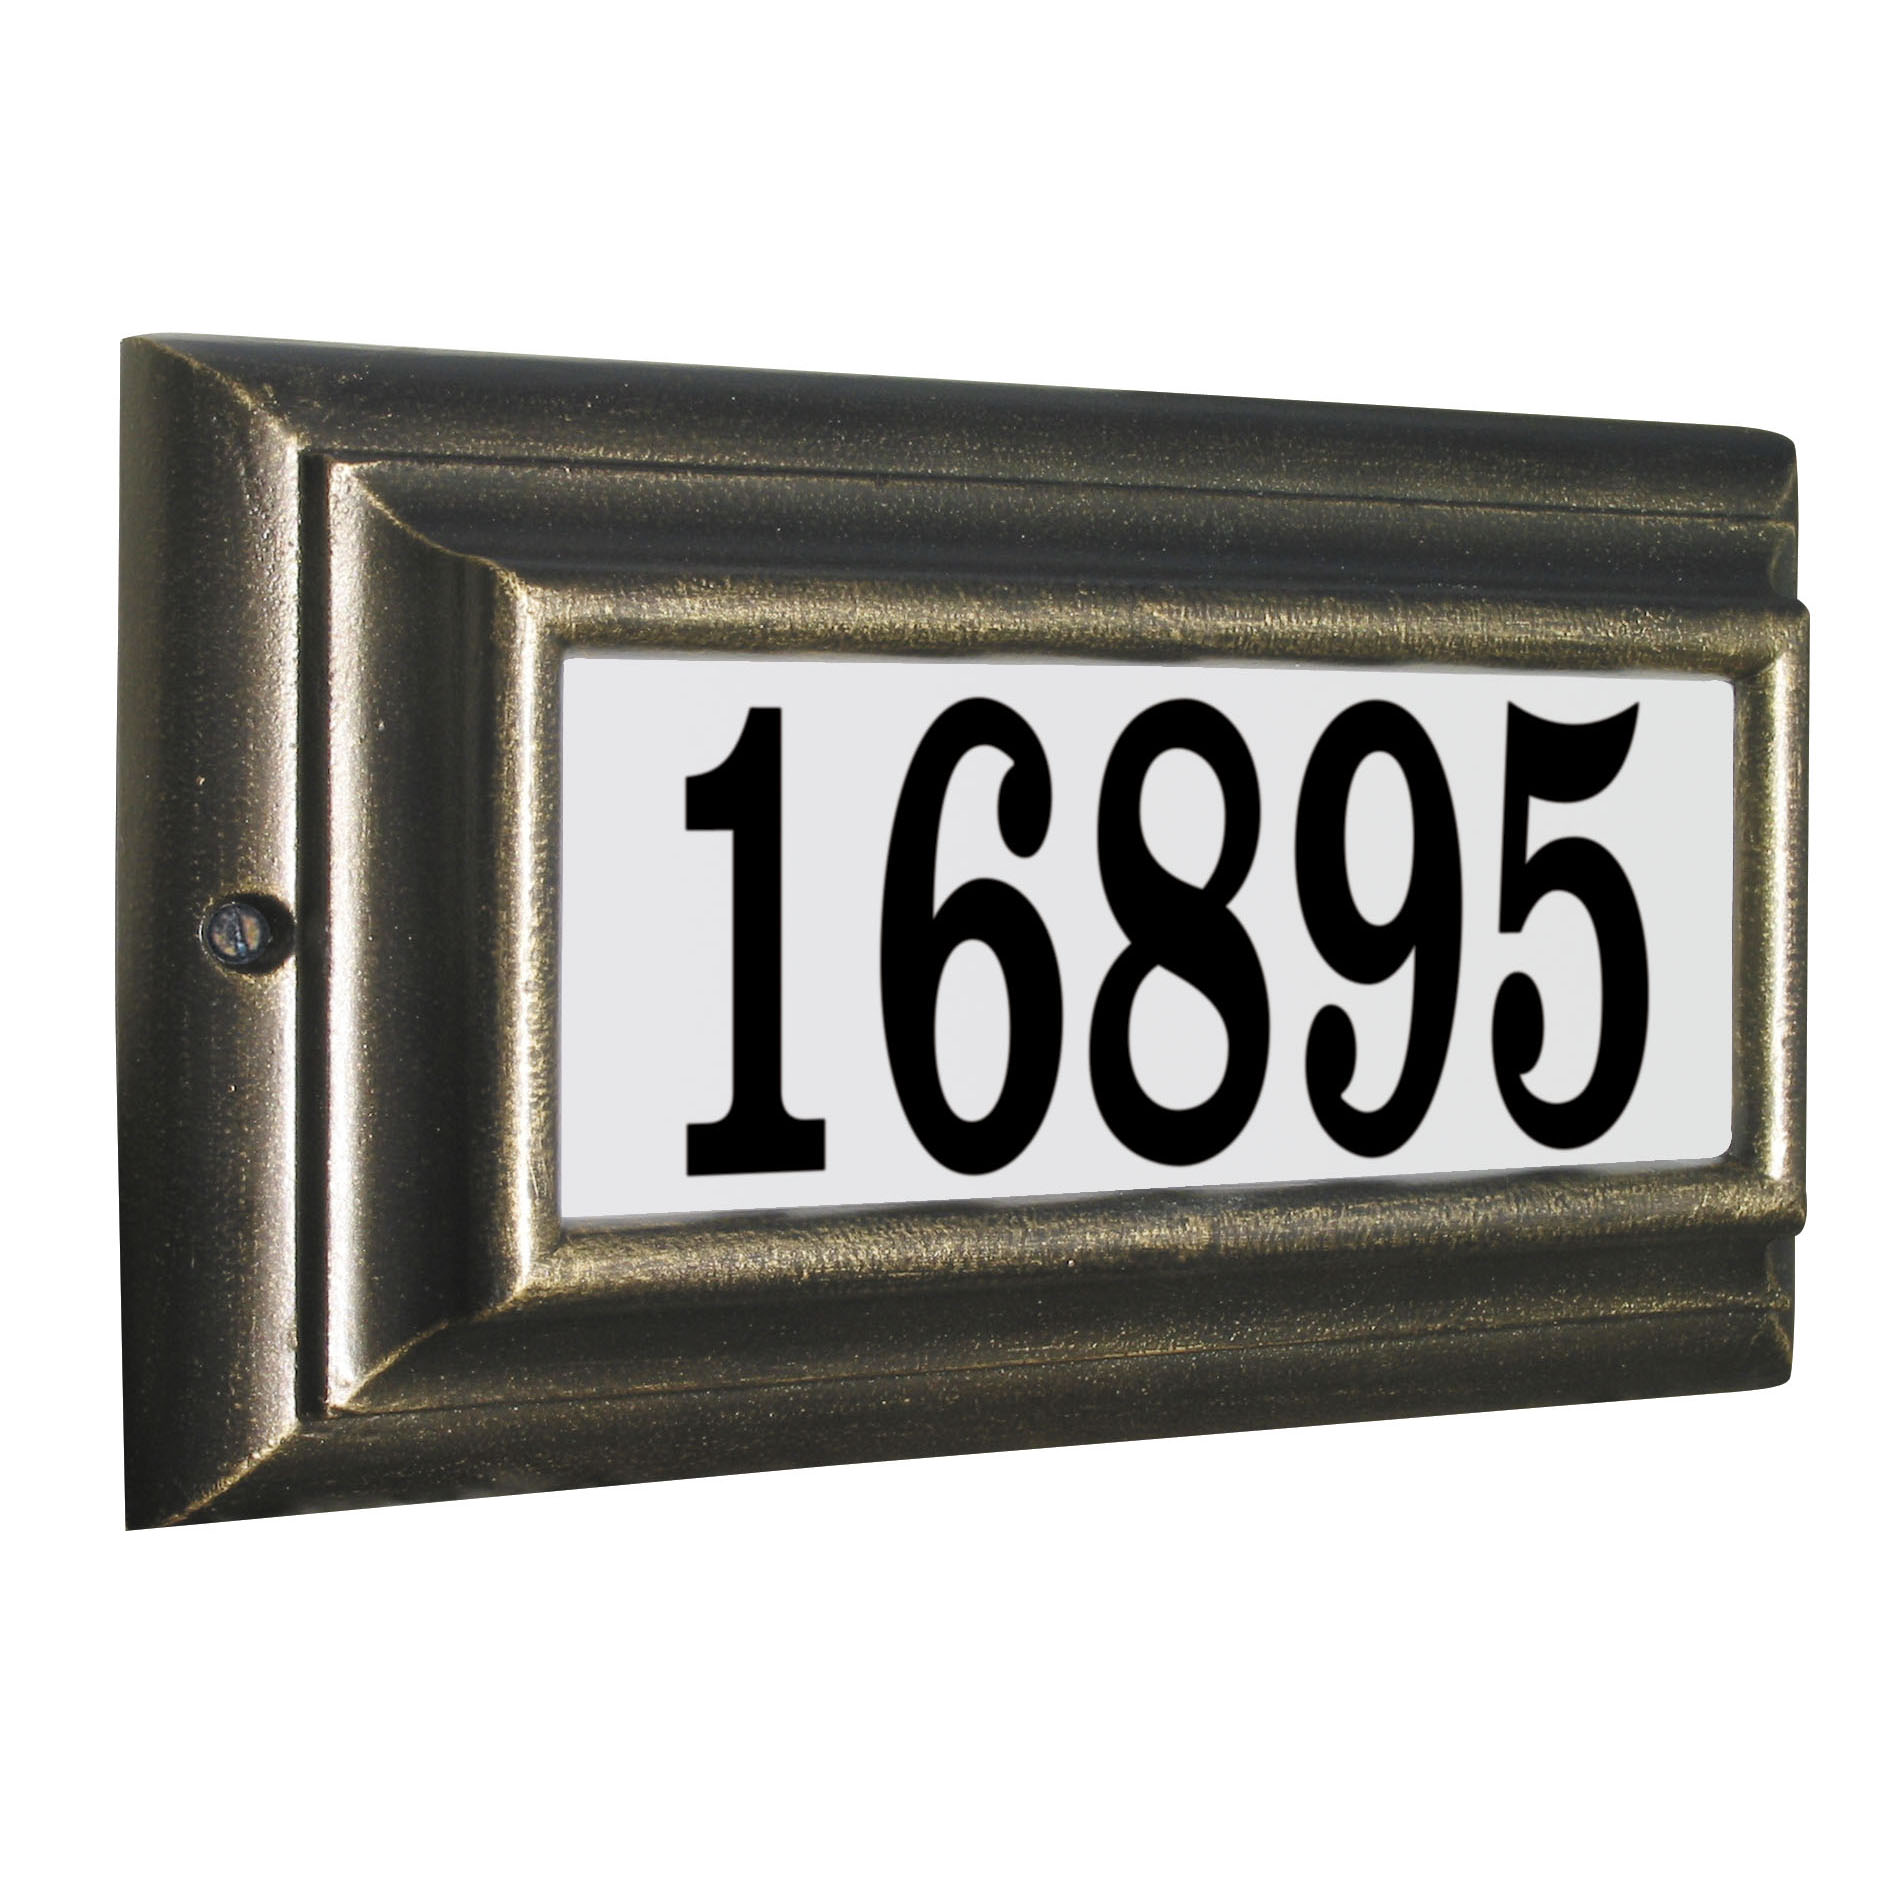 Edgewood Standard Lighted Address Plaque In Pewter Frame Color With Led Lights